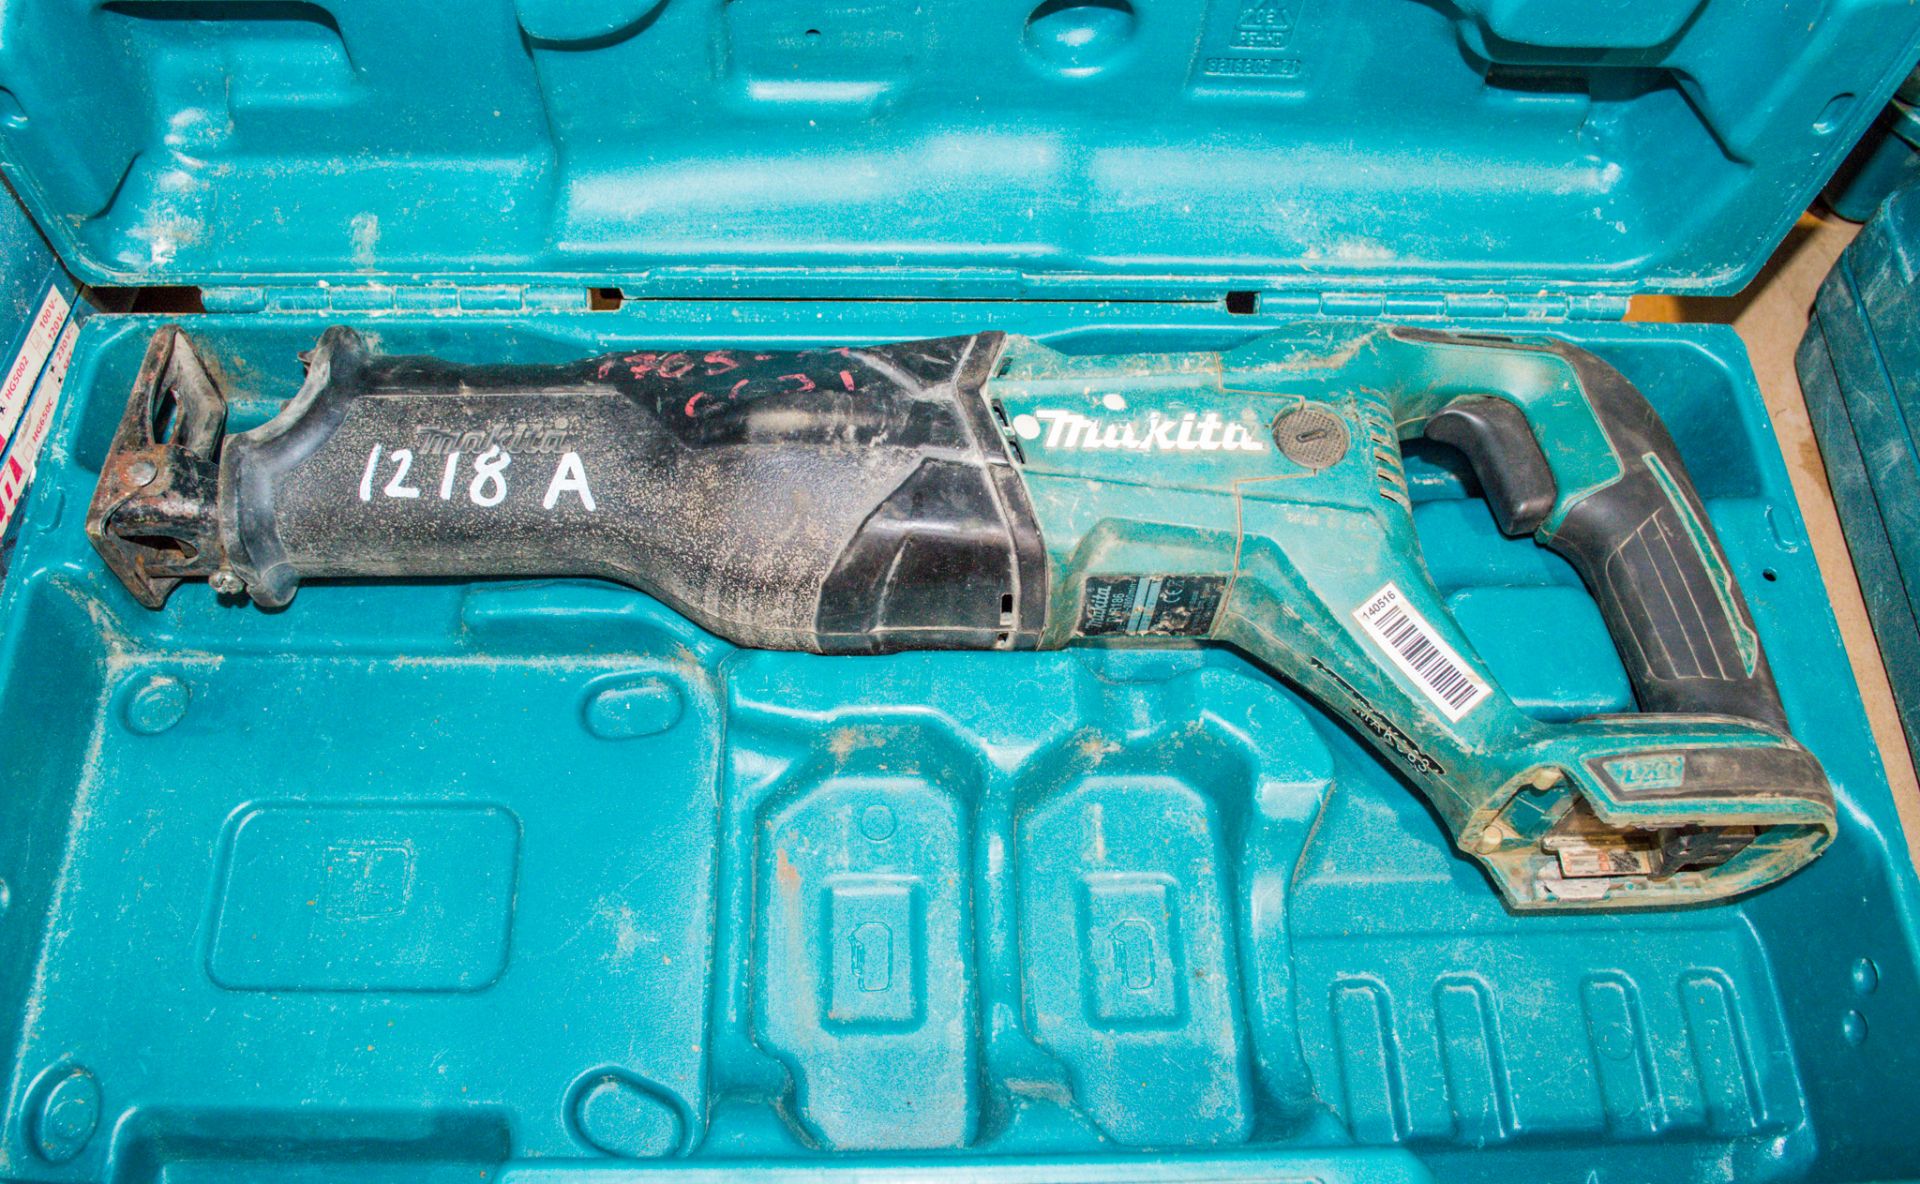 Makita DJR186 18v cordless reciprocating saw c/w carry case MAK0634 ** No battery or charger **